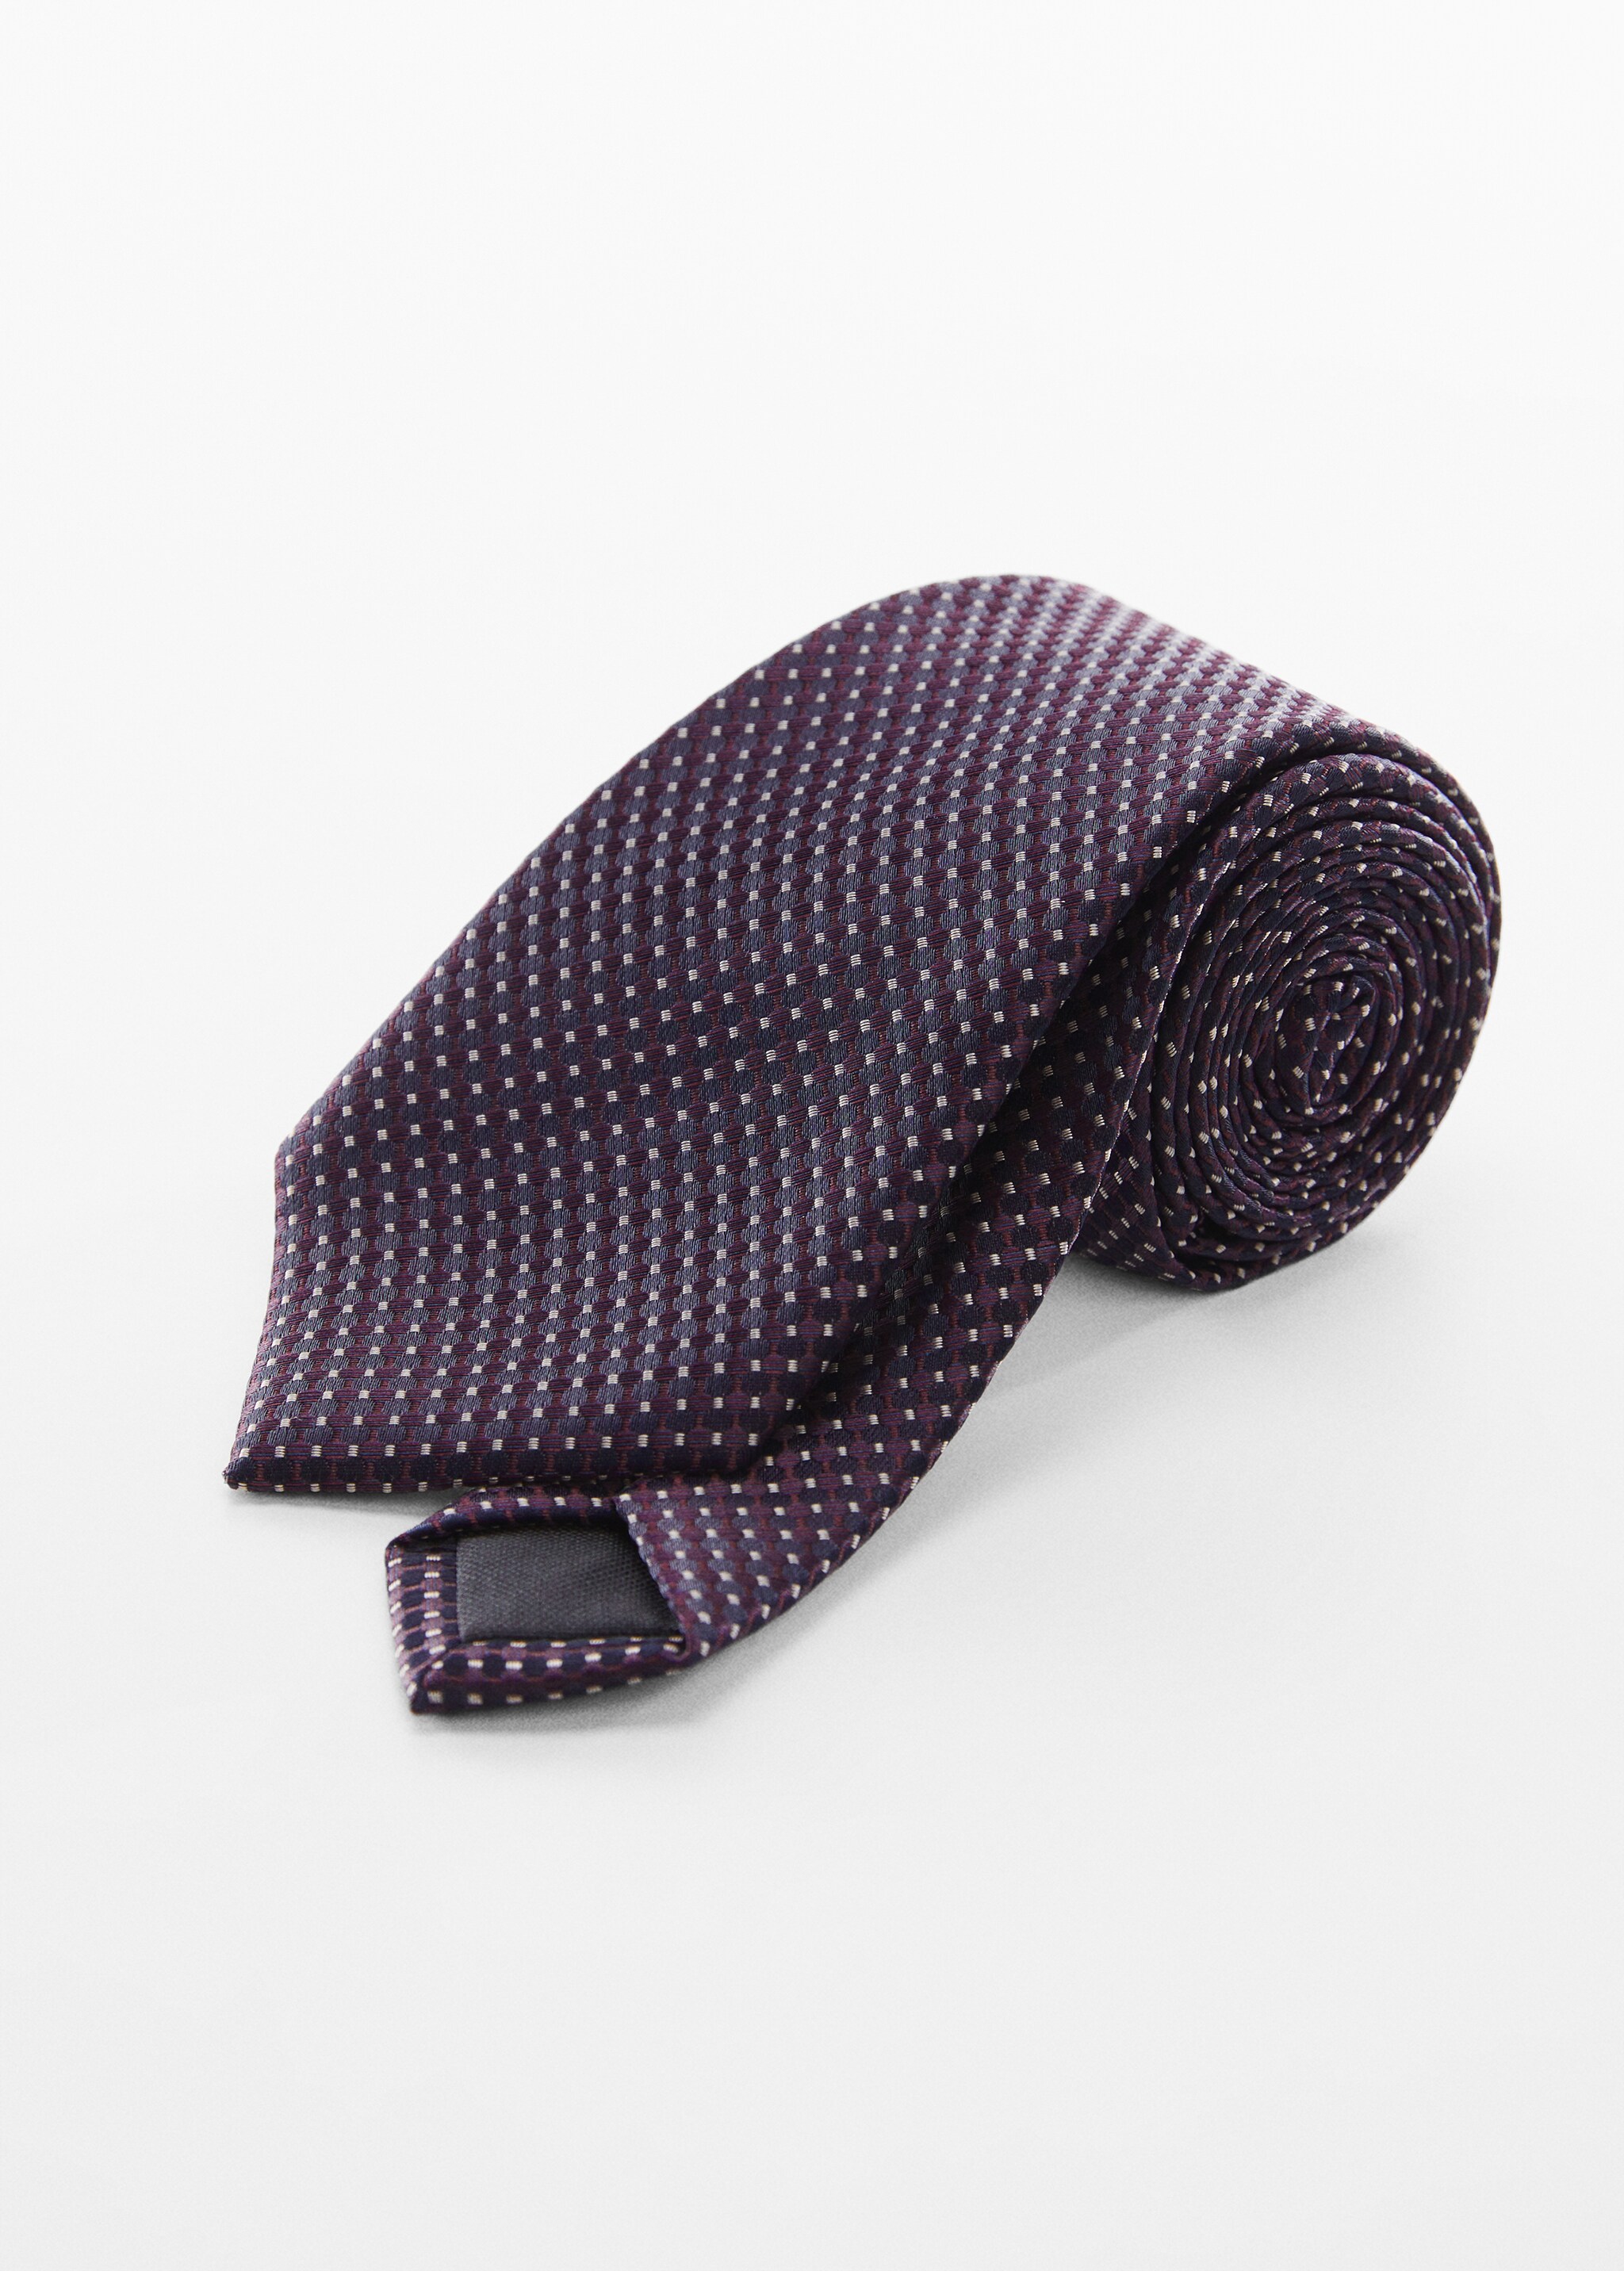 Tie with micro polka-dot structure - Medium plane